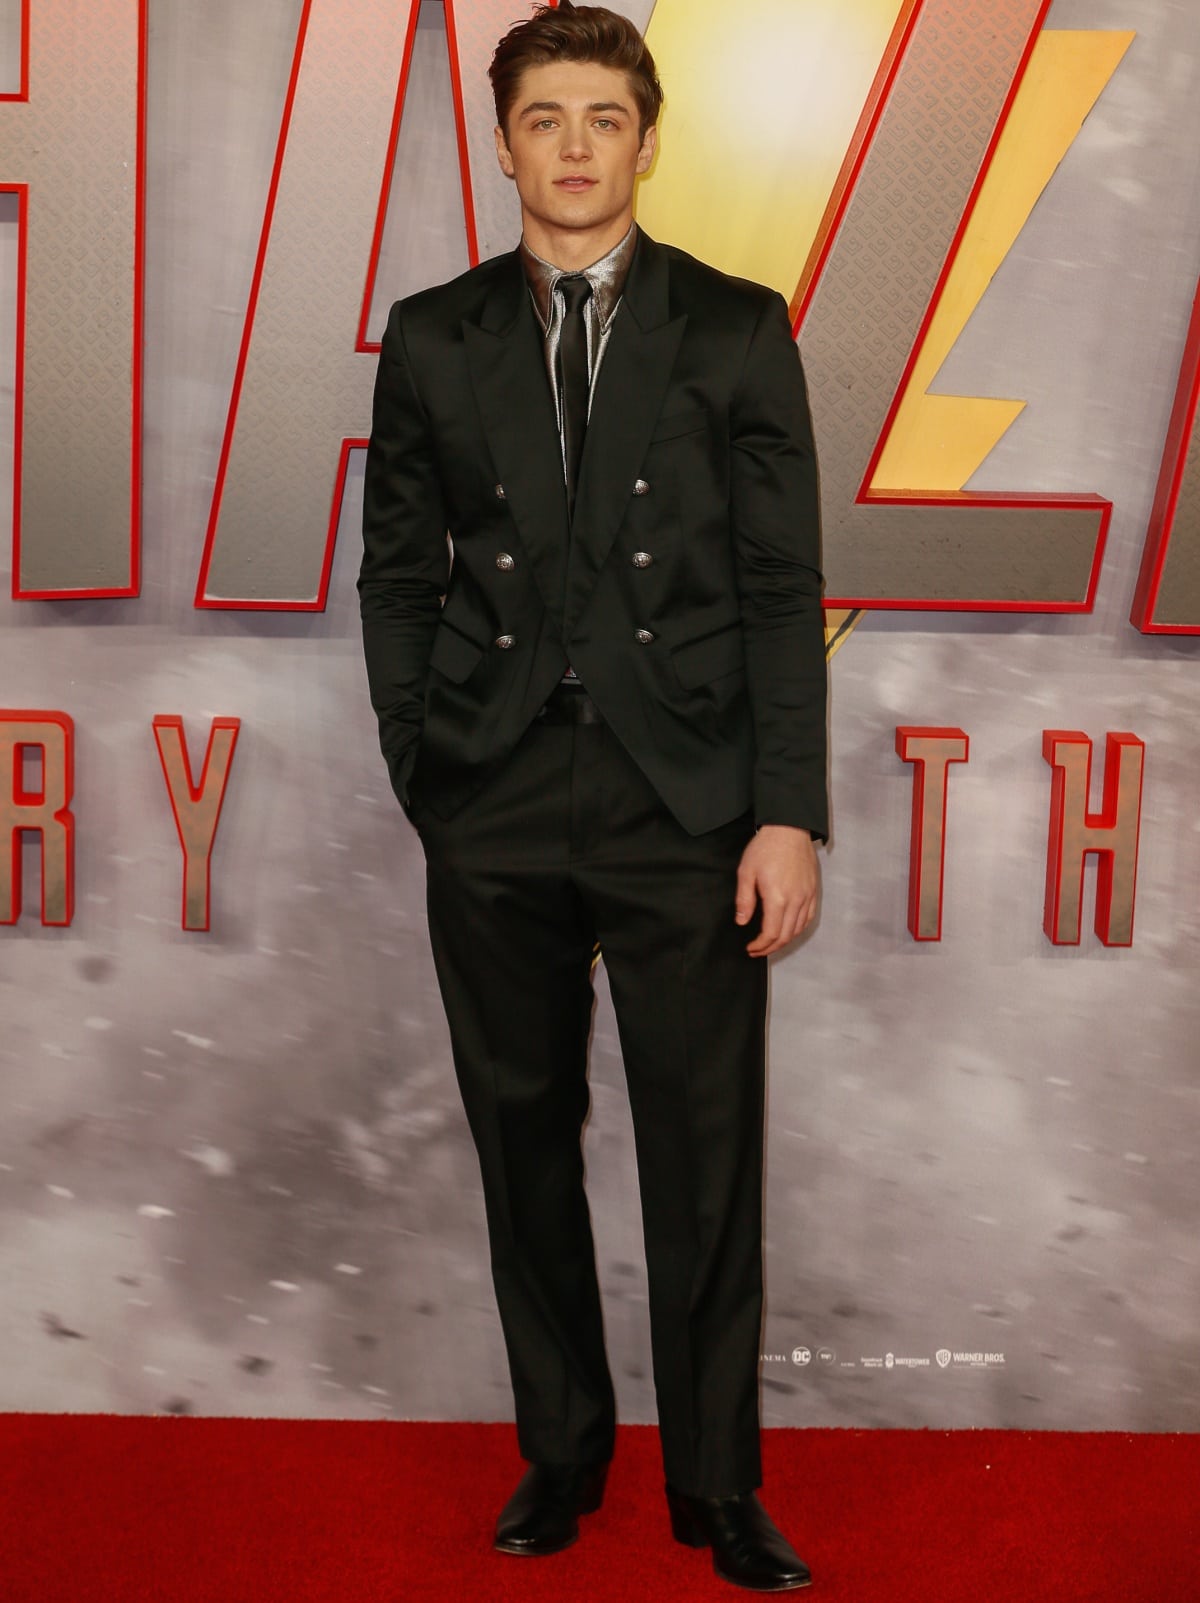 Asher Angel suited up for the UK premiere of Shazam! Fury of the Gods